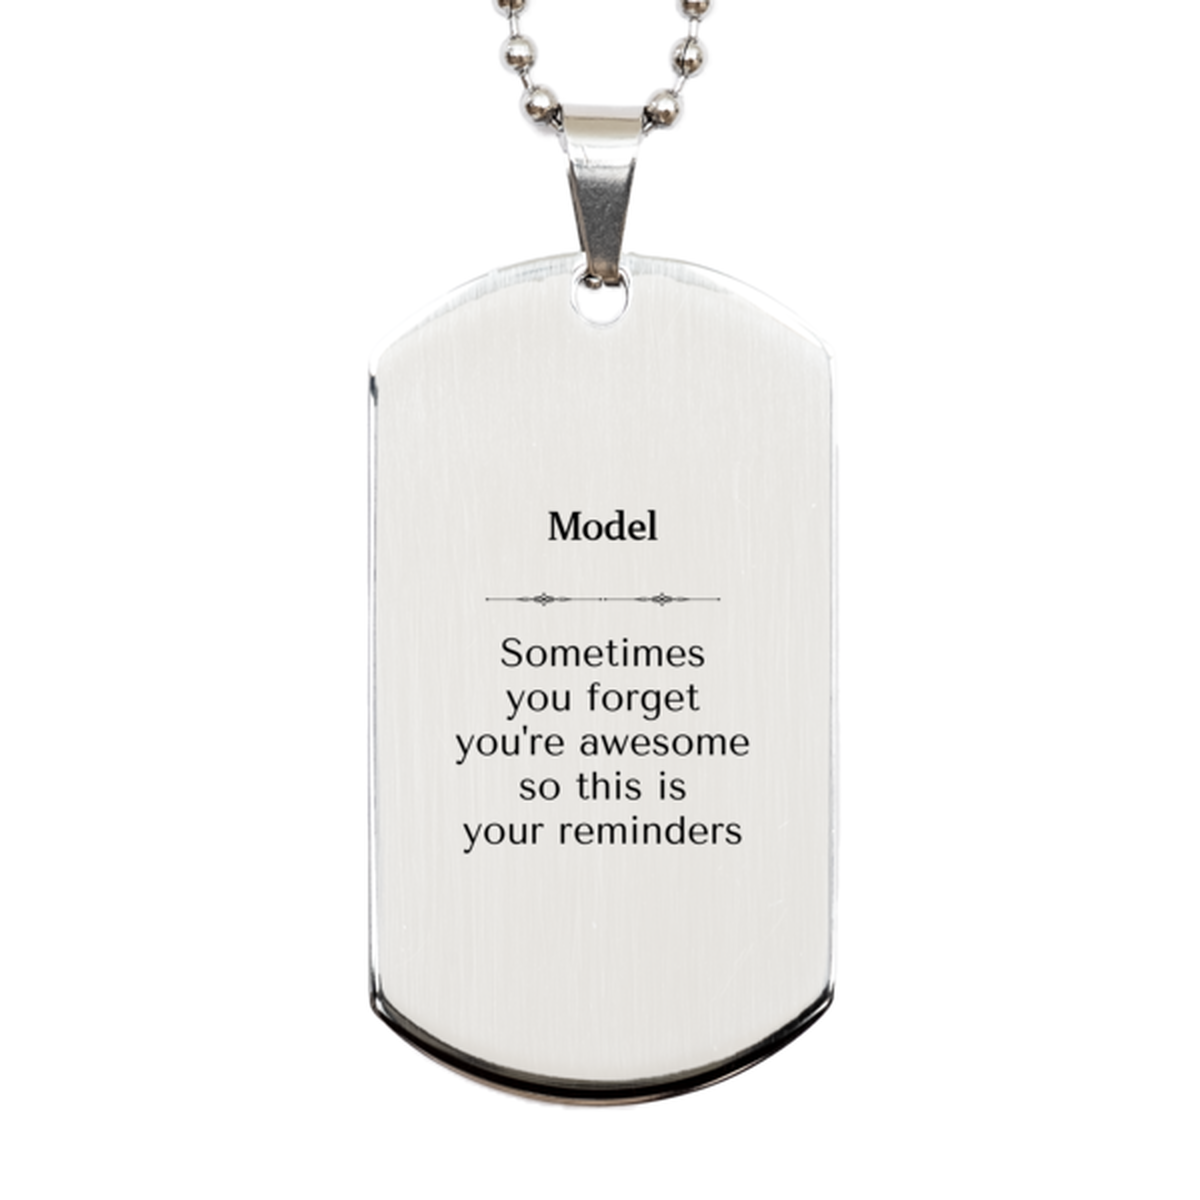 Sentimental Model Silver Dog Tag, Model Sometimes you forget you're awesome so this is your reminders, Graduation Christmas Birthday Gifts for Model, Men, Women, Coworkers